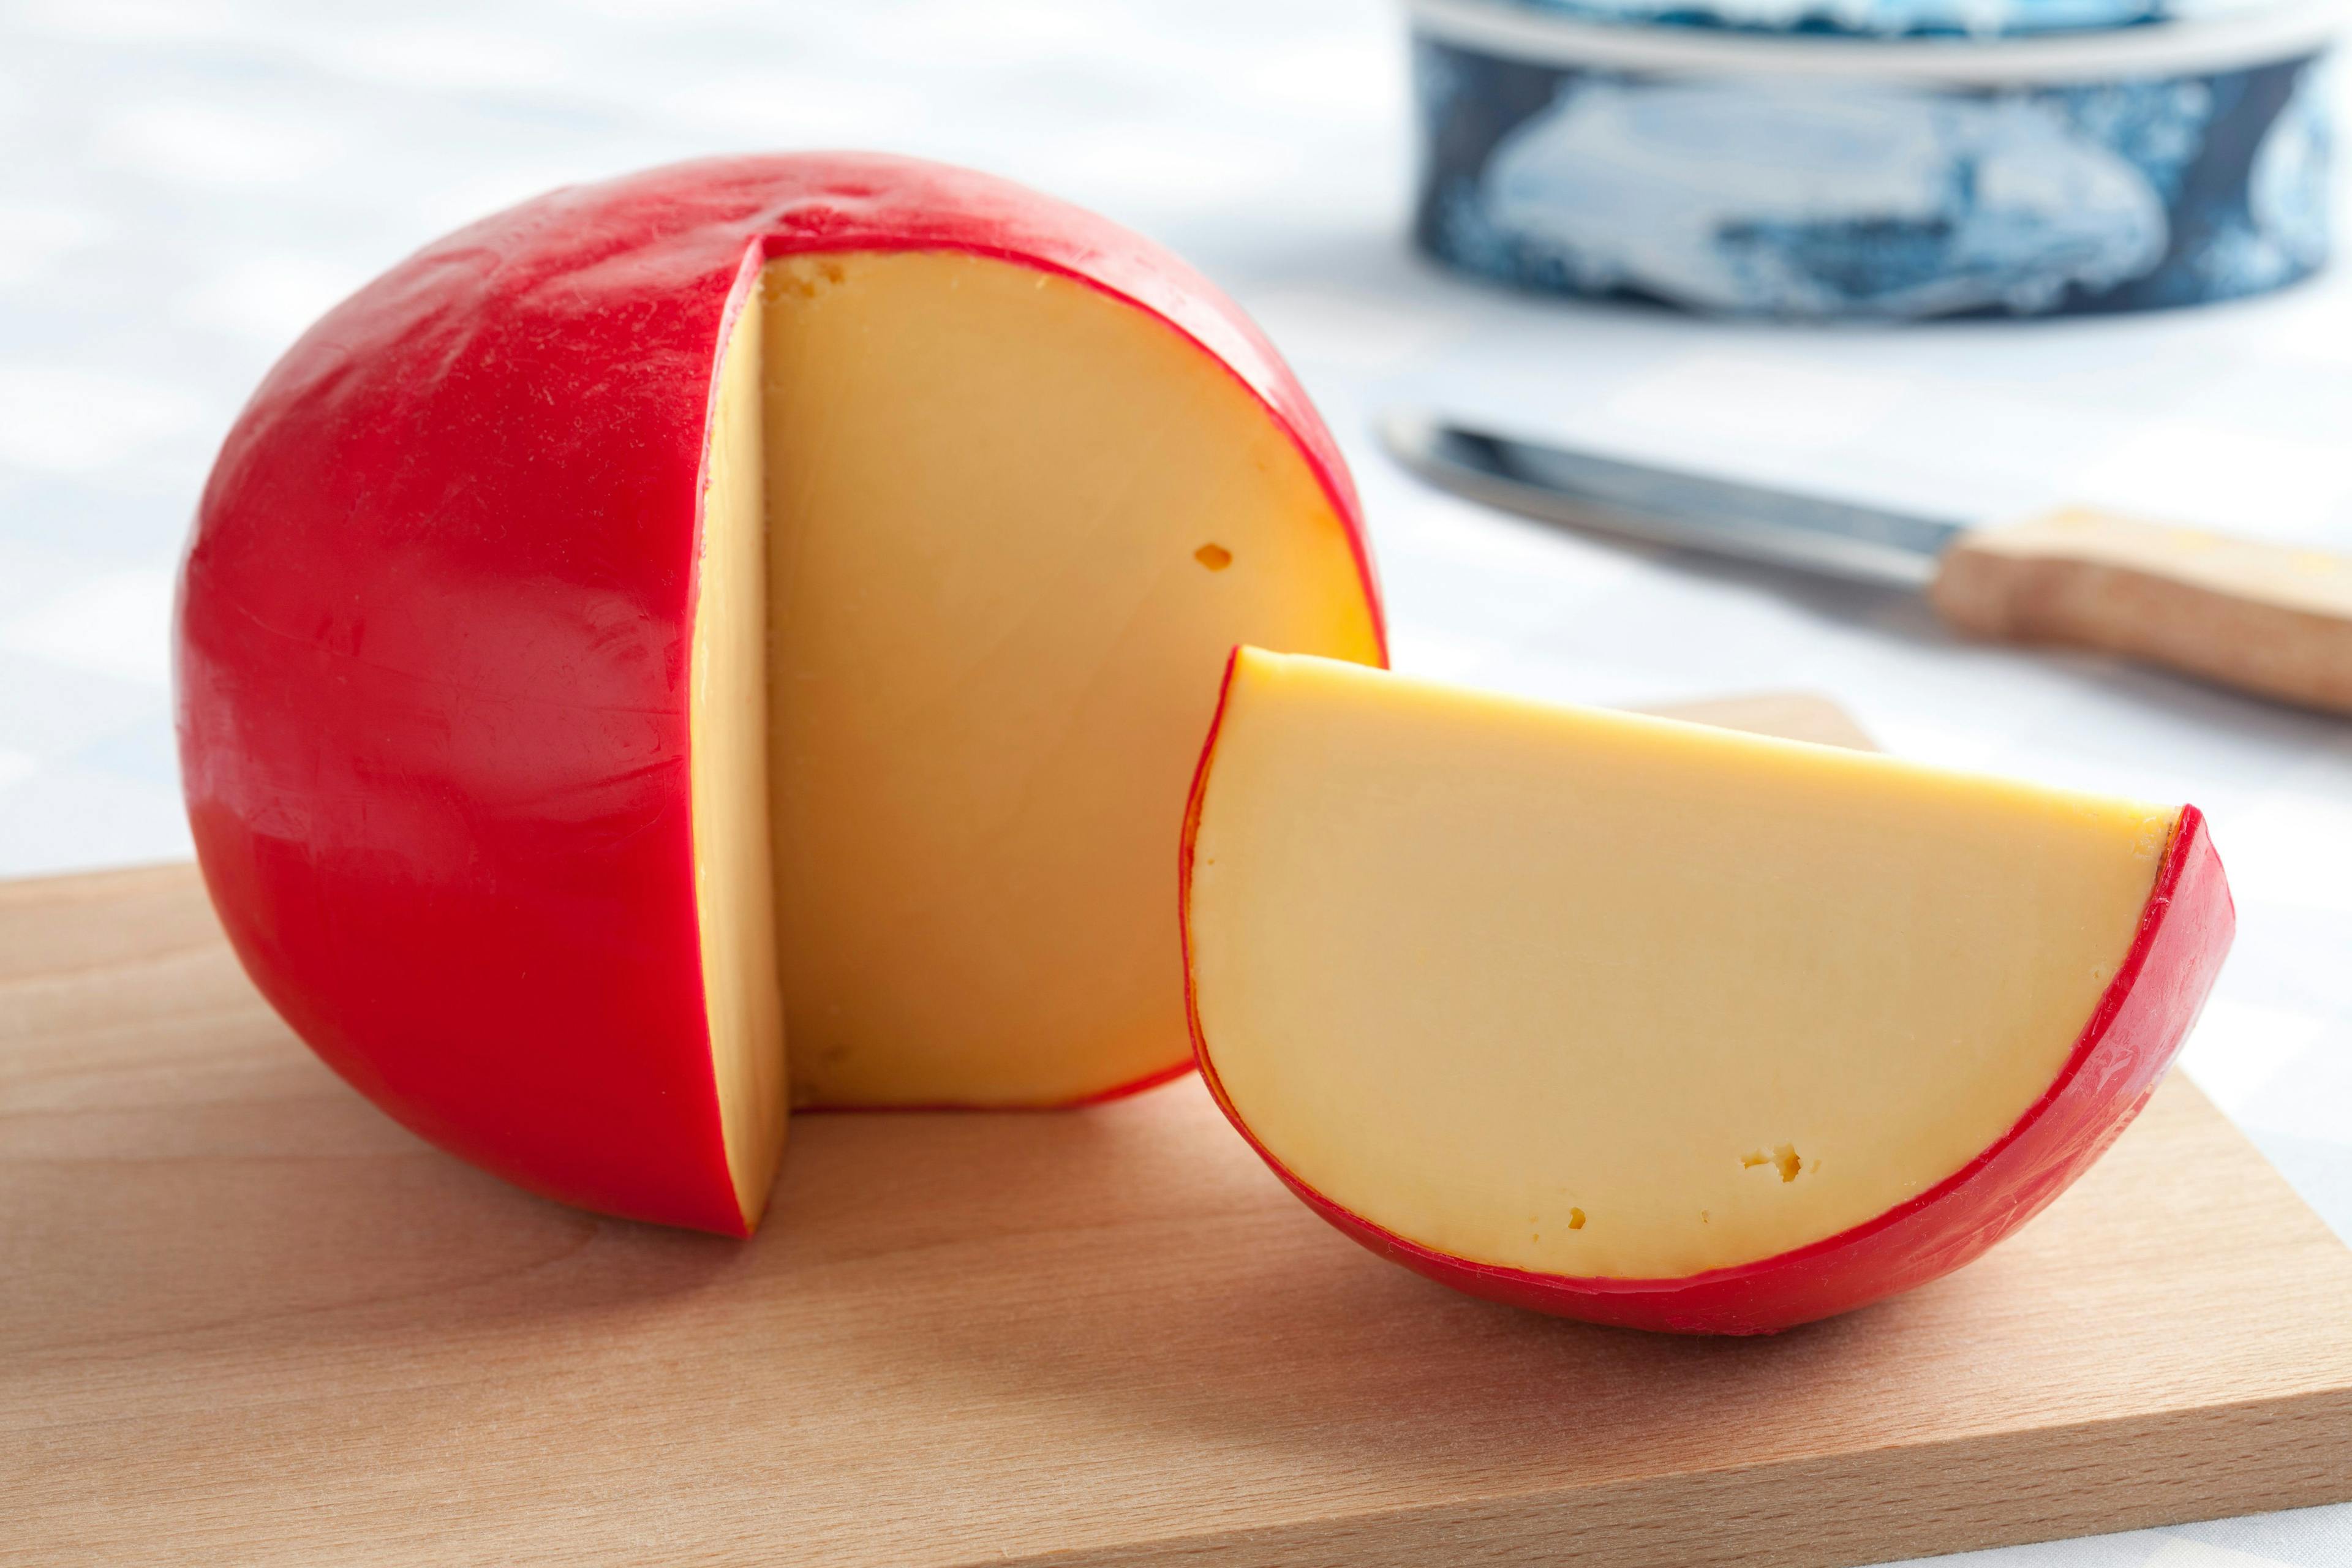 Edam cheese on a cutting board | Image Credit: © Picture Partners - stock.adobe.com